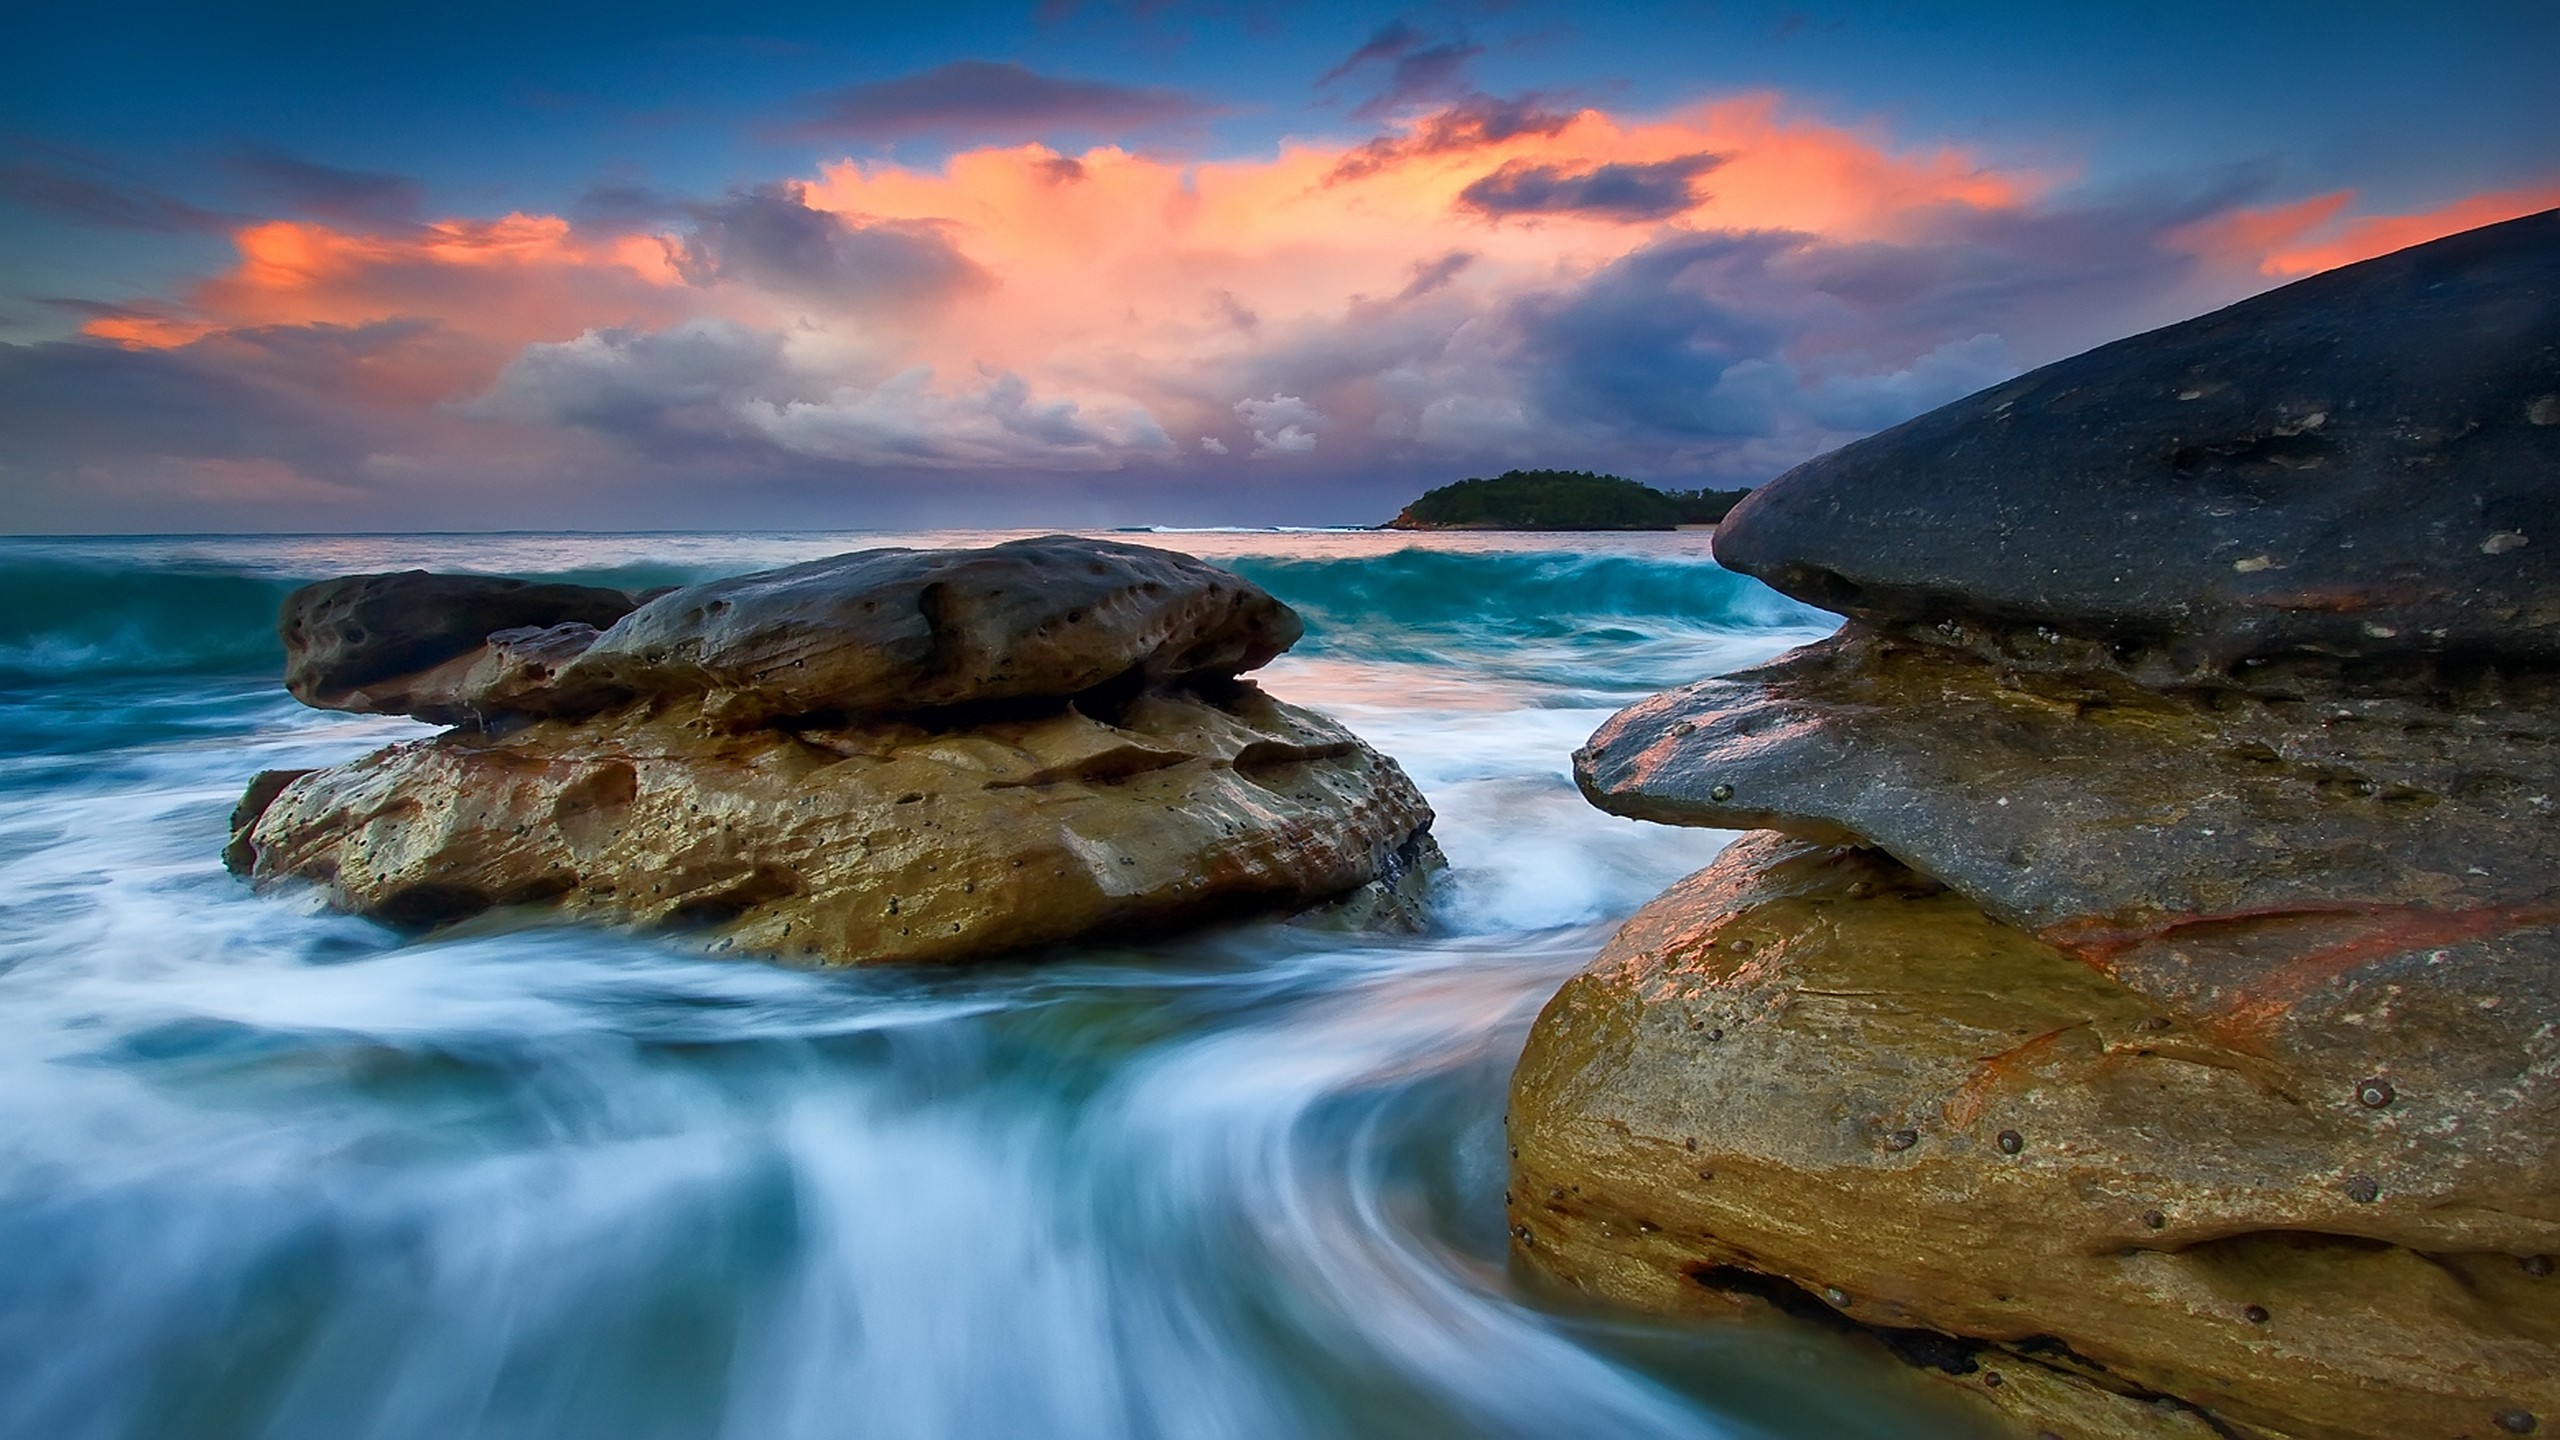 clouds, Landscapes, Nature, Beach, Rocks, Shore, Hdr, Photography, Skyscapes Wallpaper